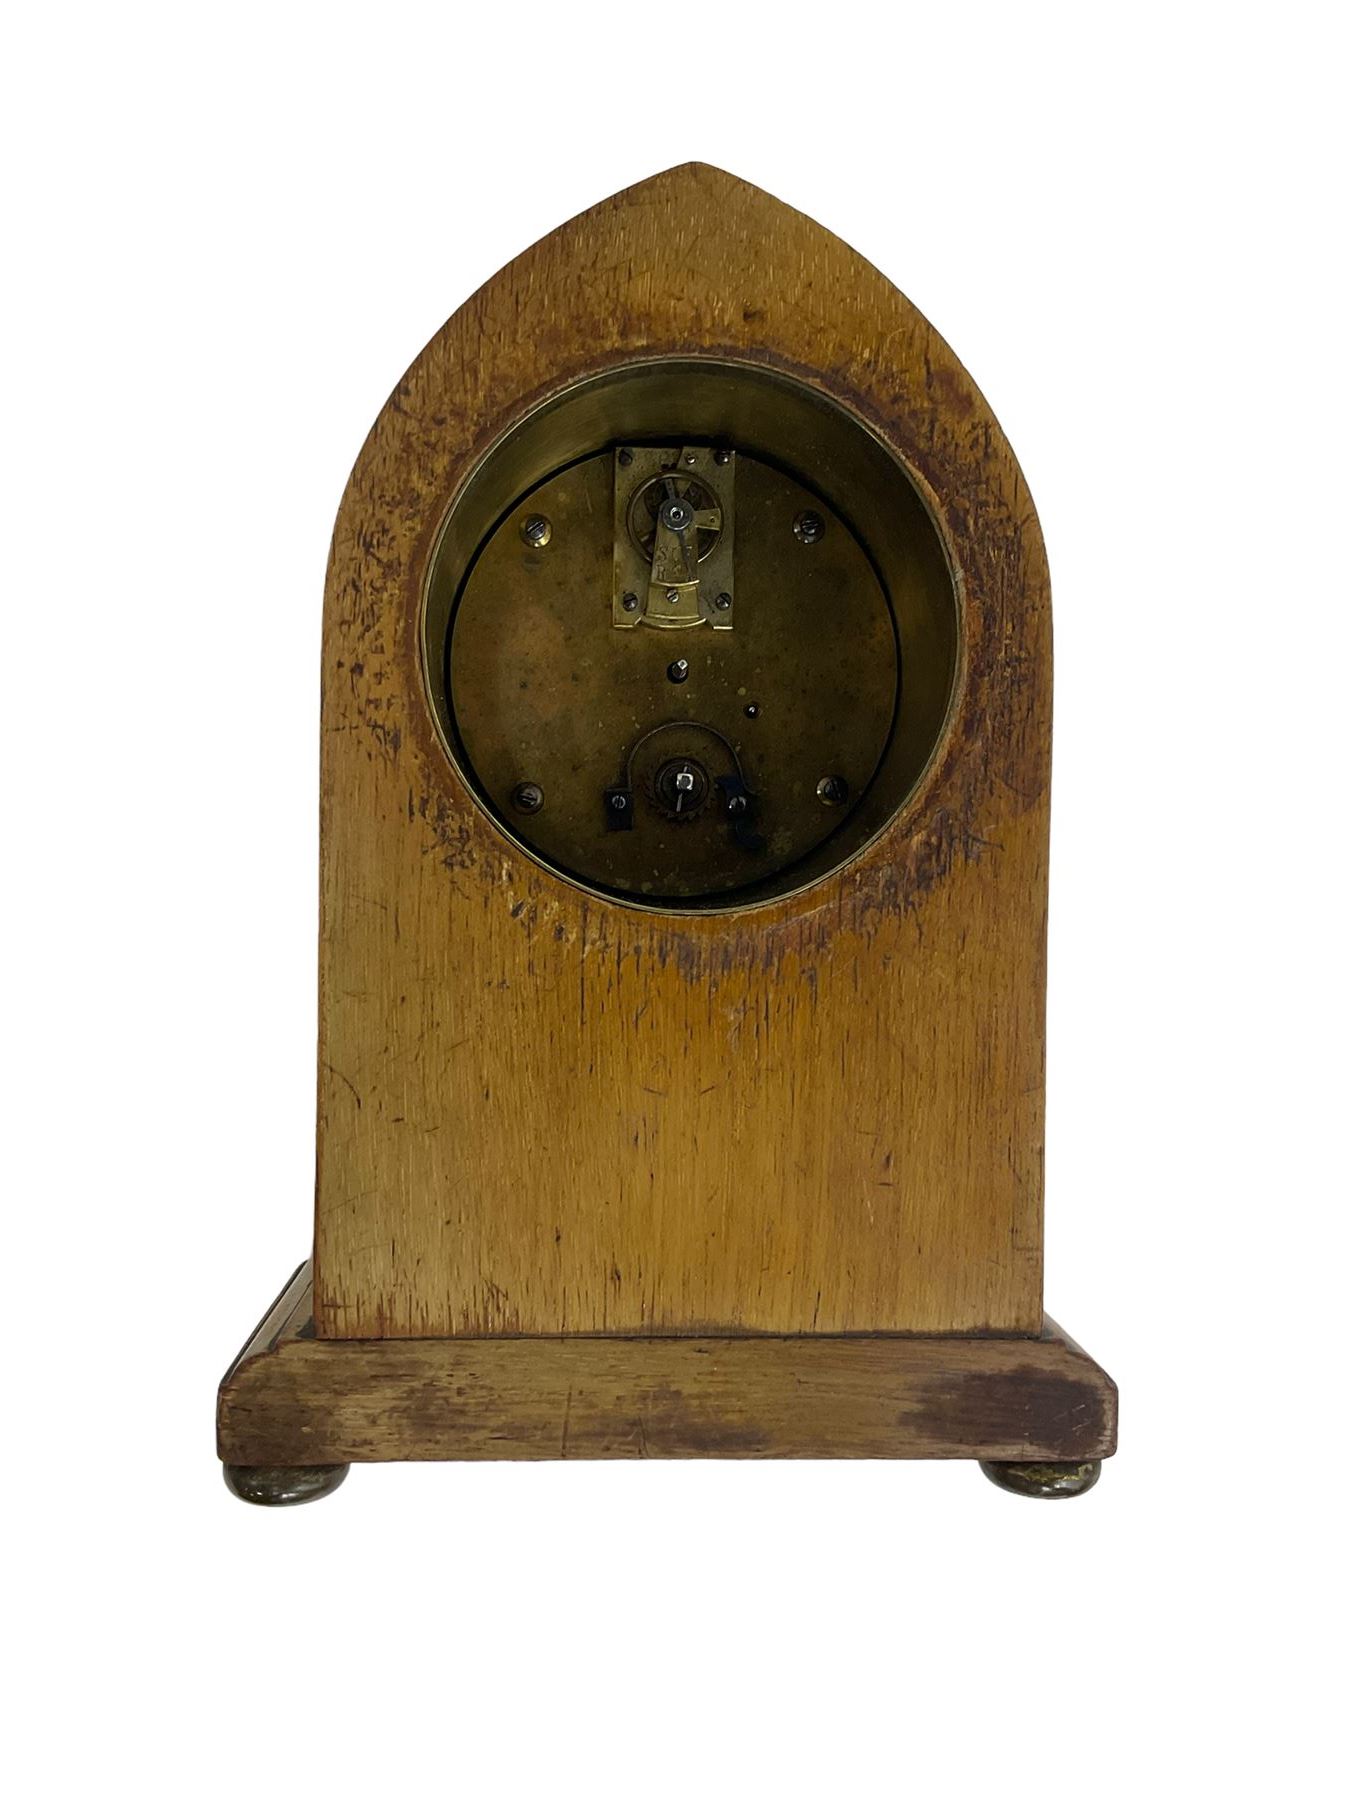 Mahogany cased Lancet clock c1910 with an inlaid cartouche and satinwood stringing - Image 3 of 3